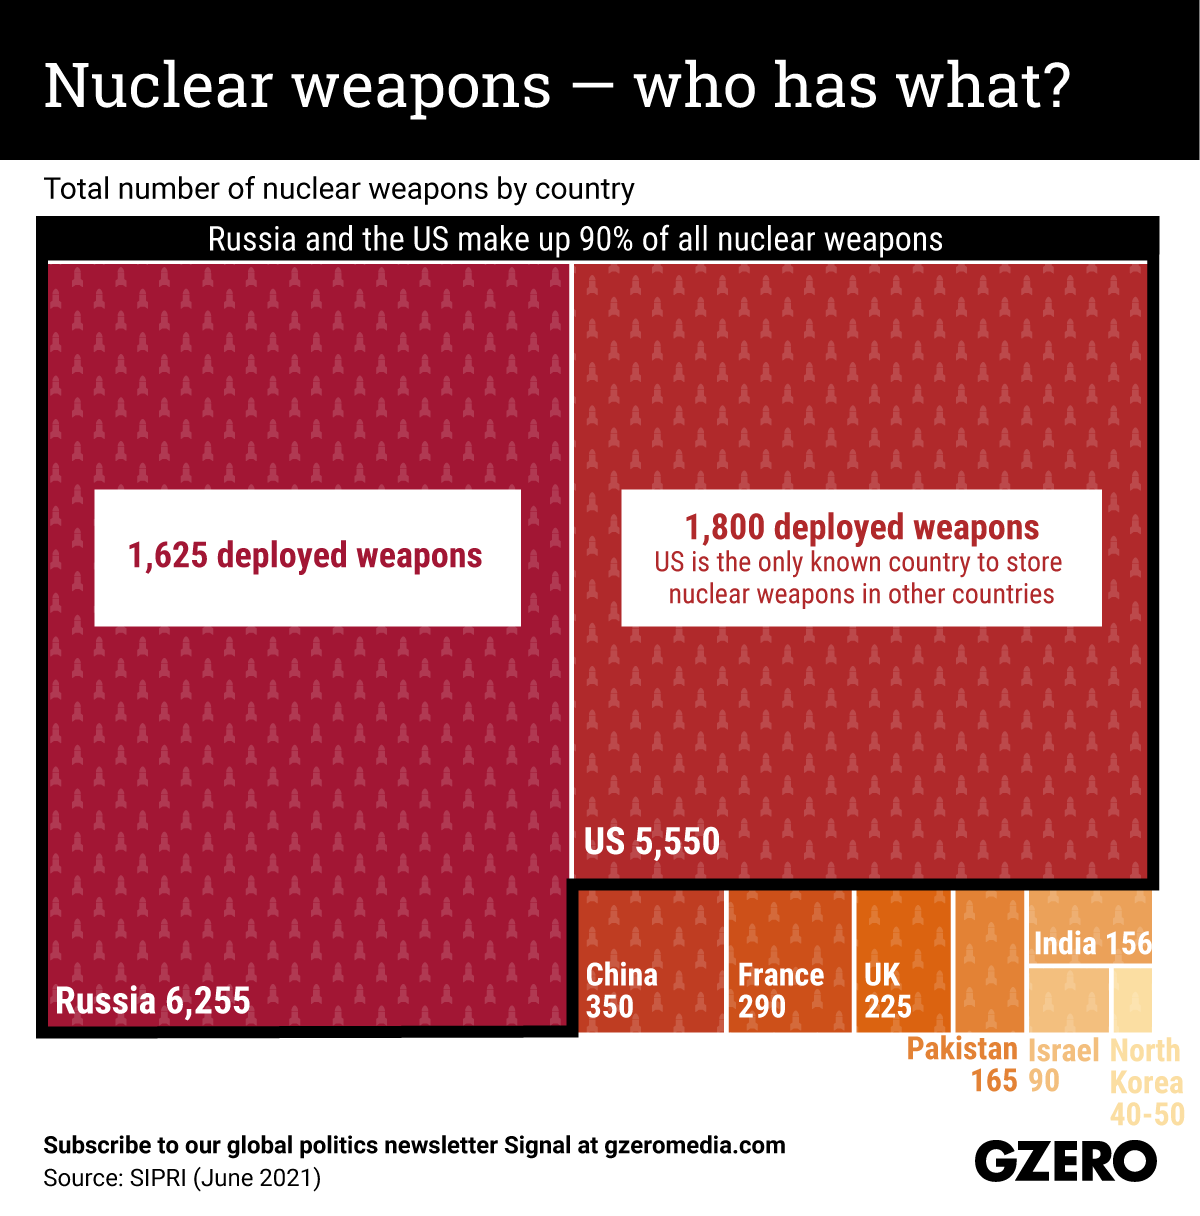 The Graphic Truth: Nuclear weapons — who has what?